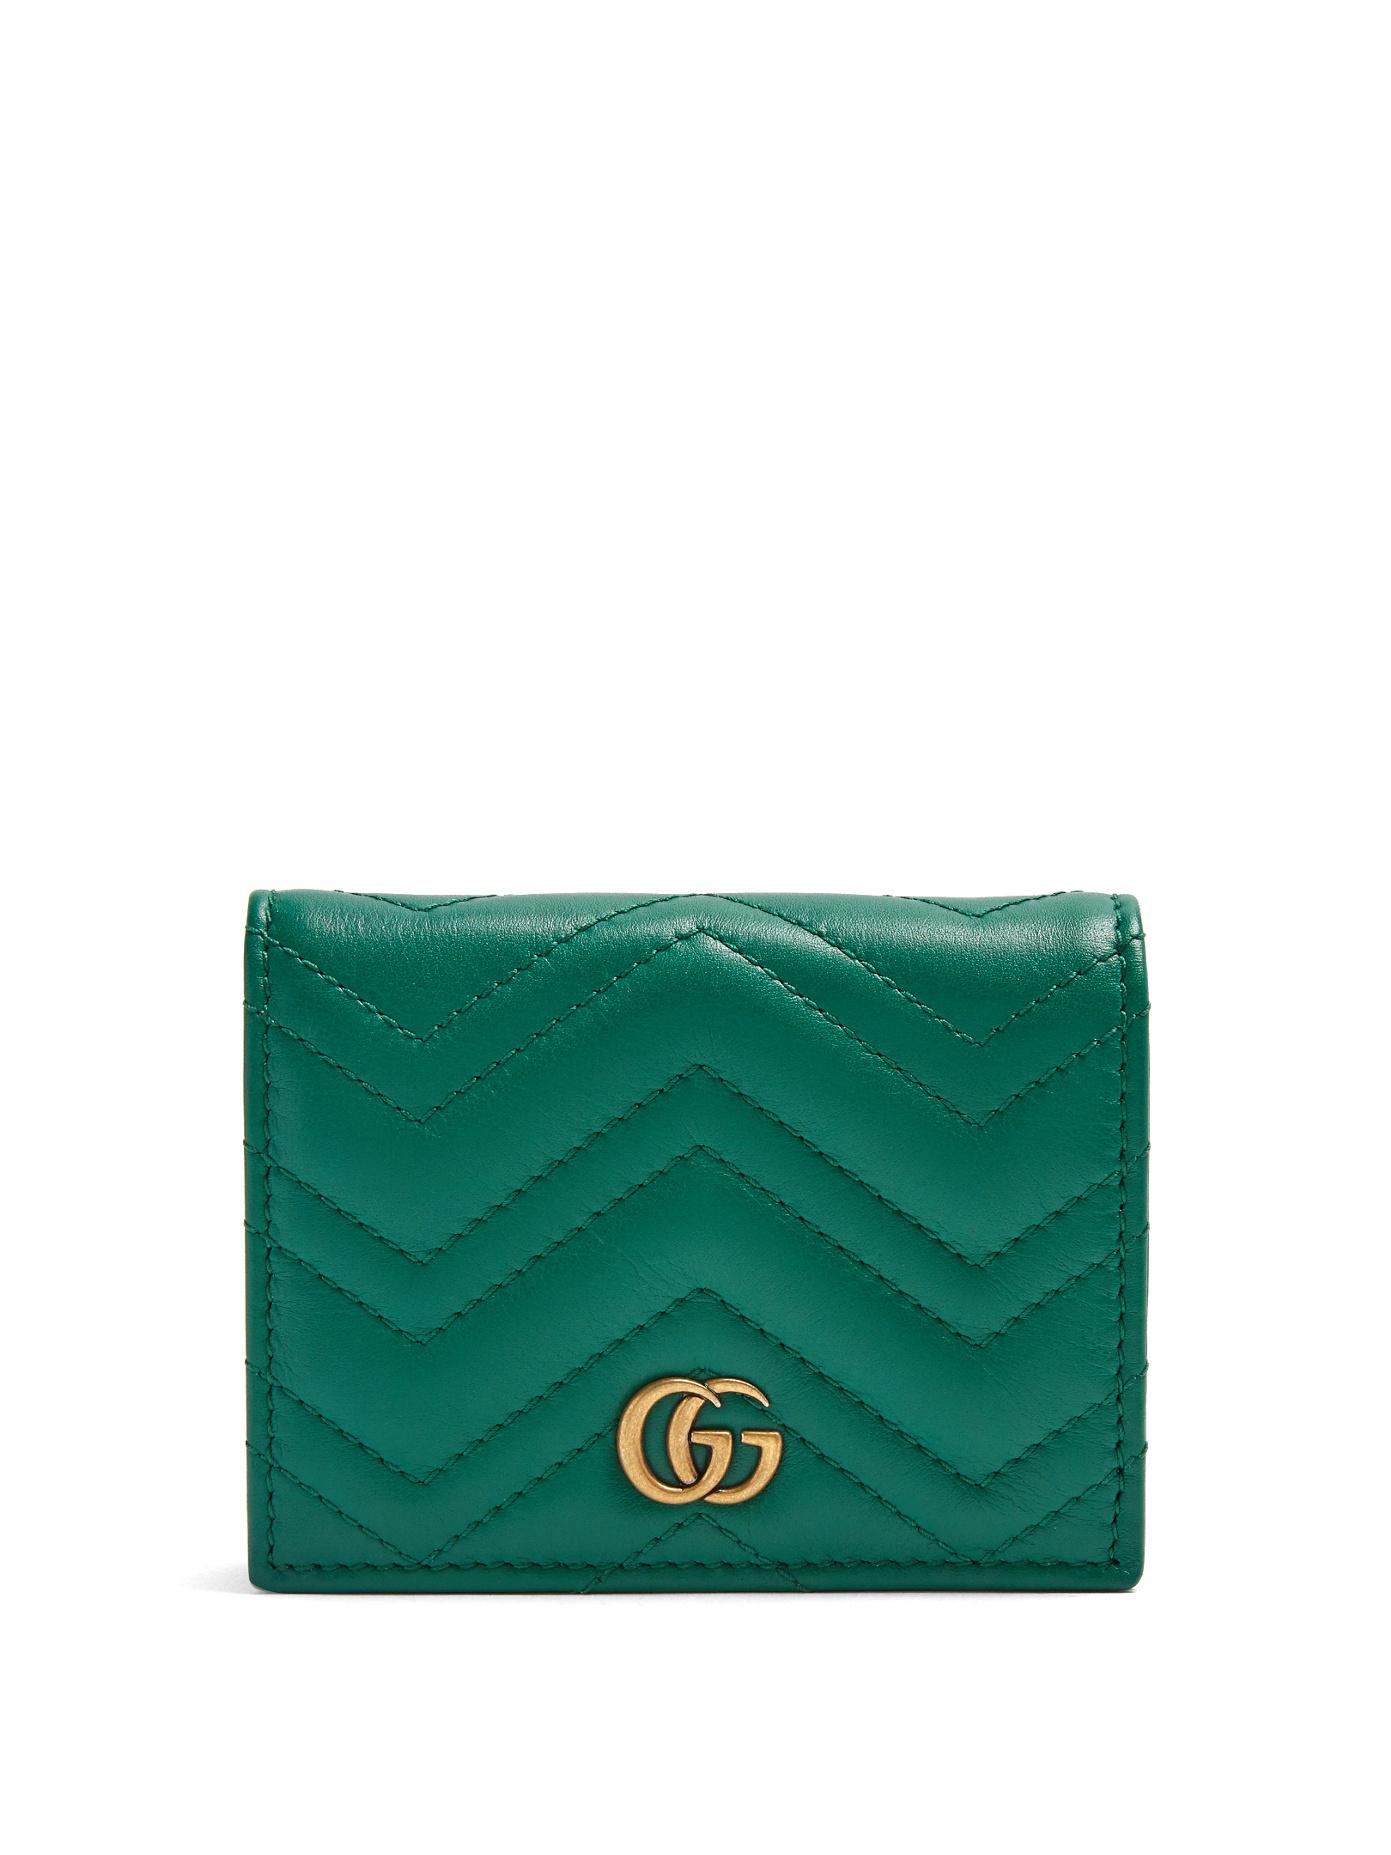 Gucci Gg Marmont Quilted-leather Wallet in Green - Lyst